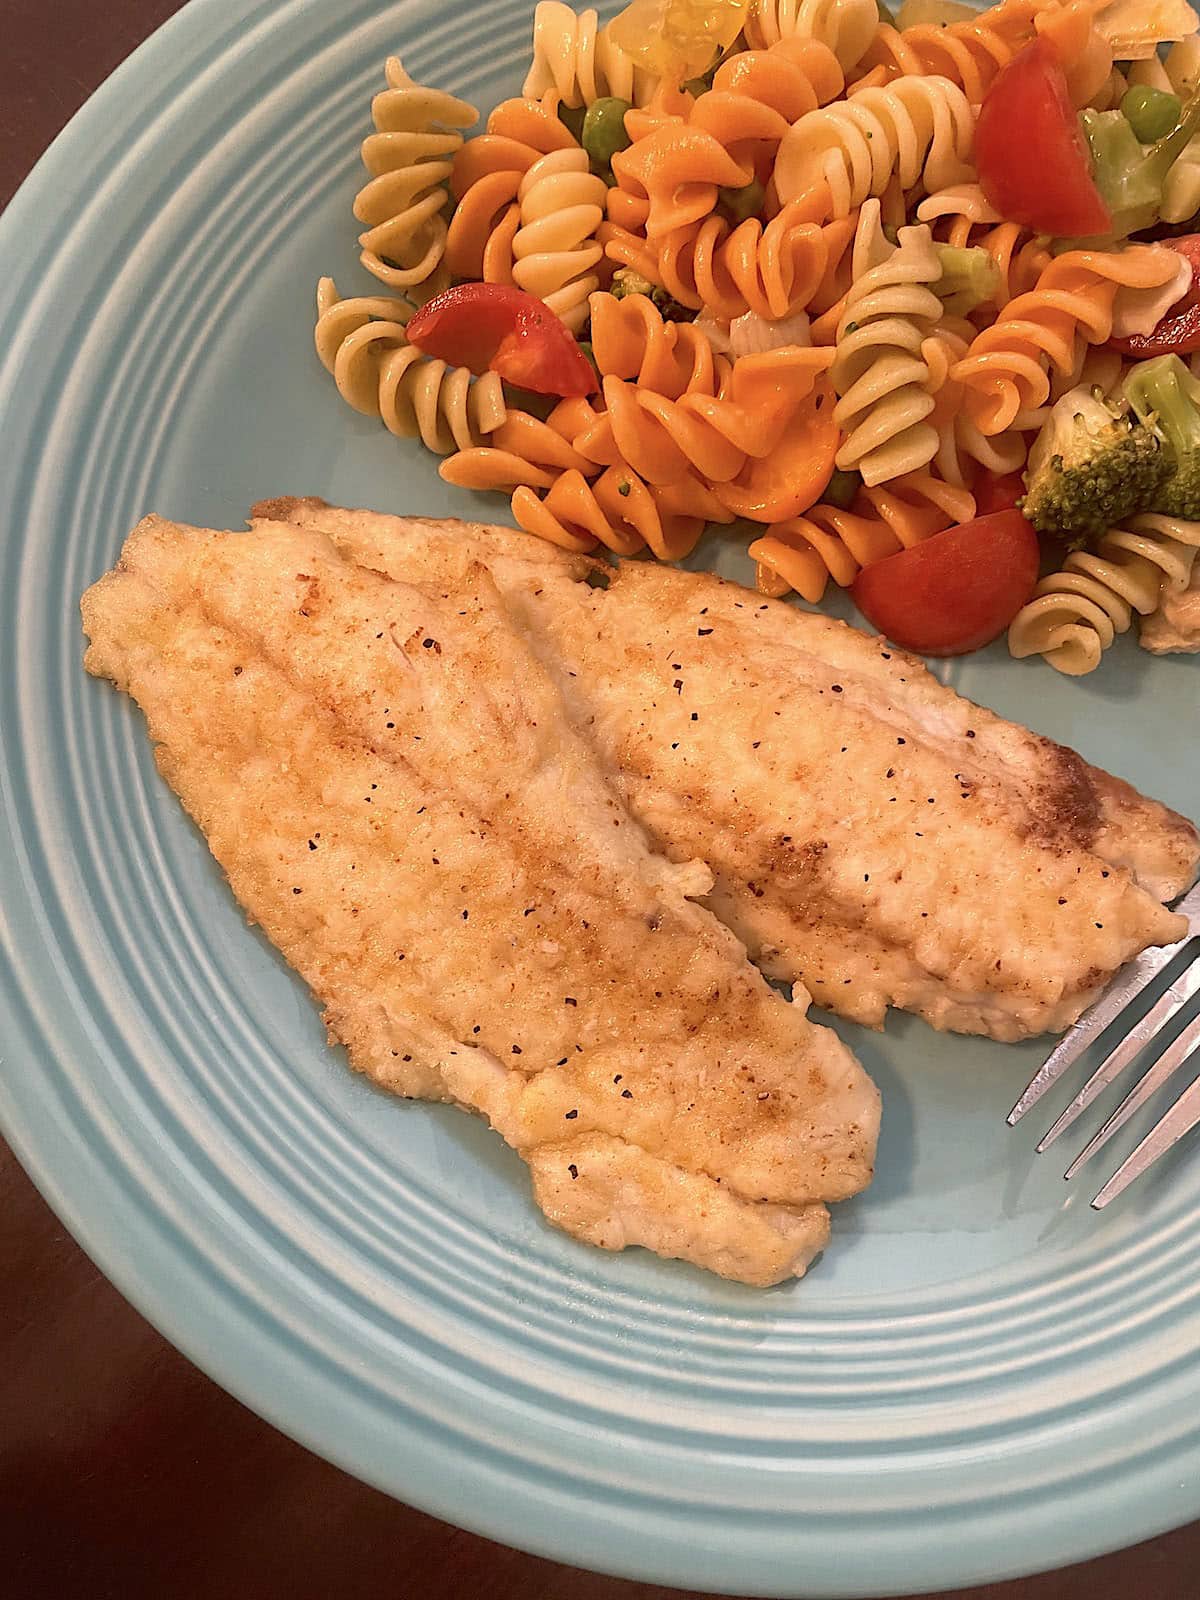 A blue plate with pan fried fish fillets and tri-color pasta salad on it.